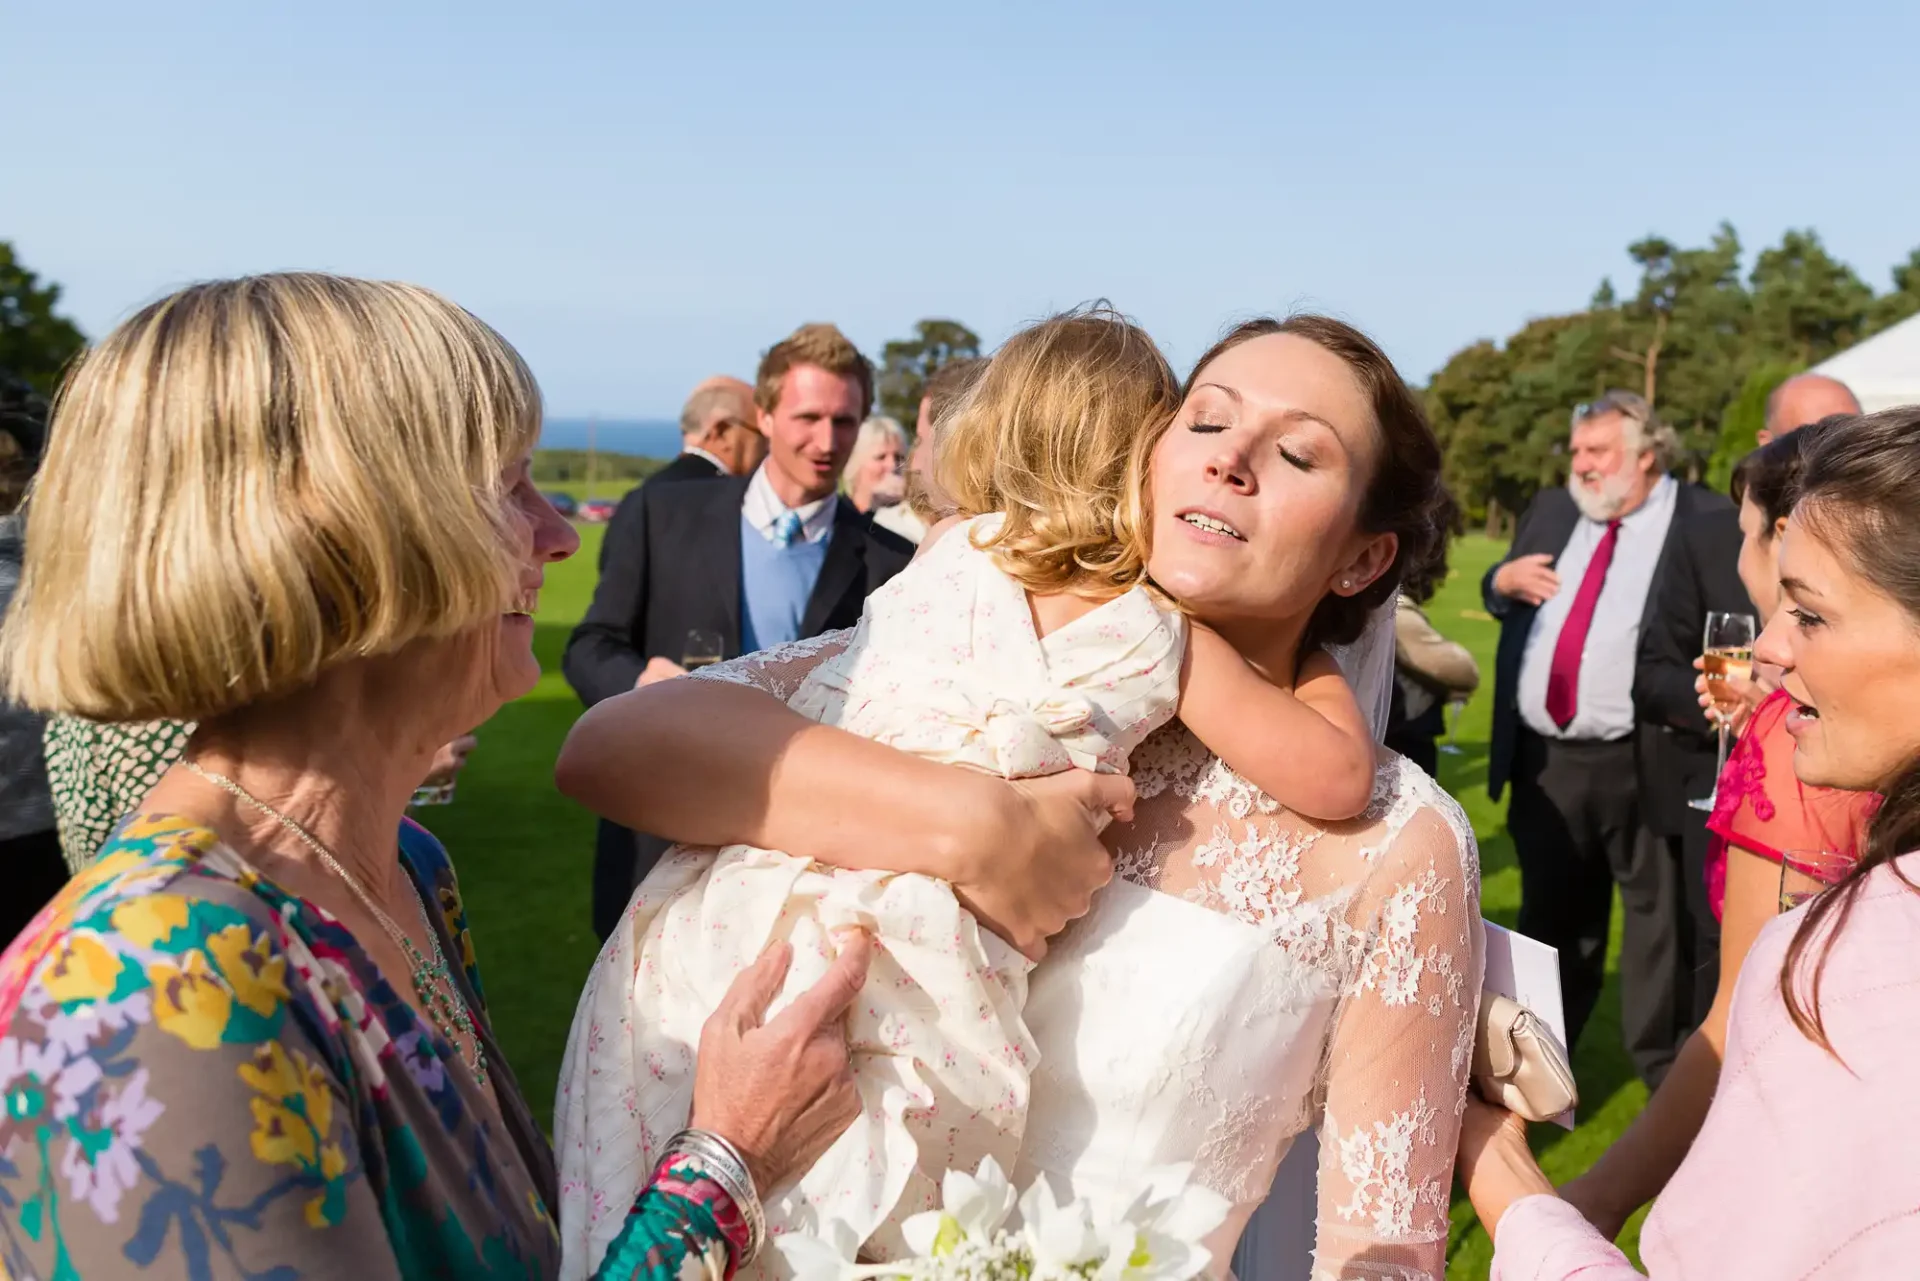 A bride embraces a child while interacting with guests at an outdoor wedding reception.